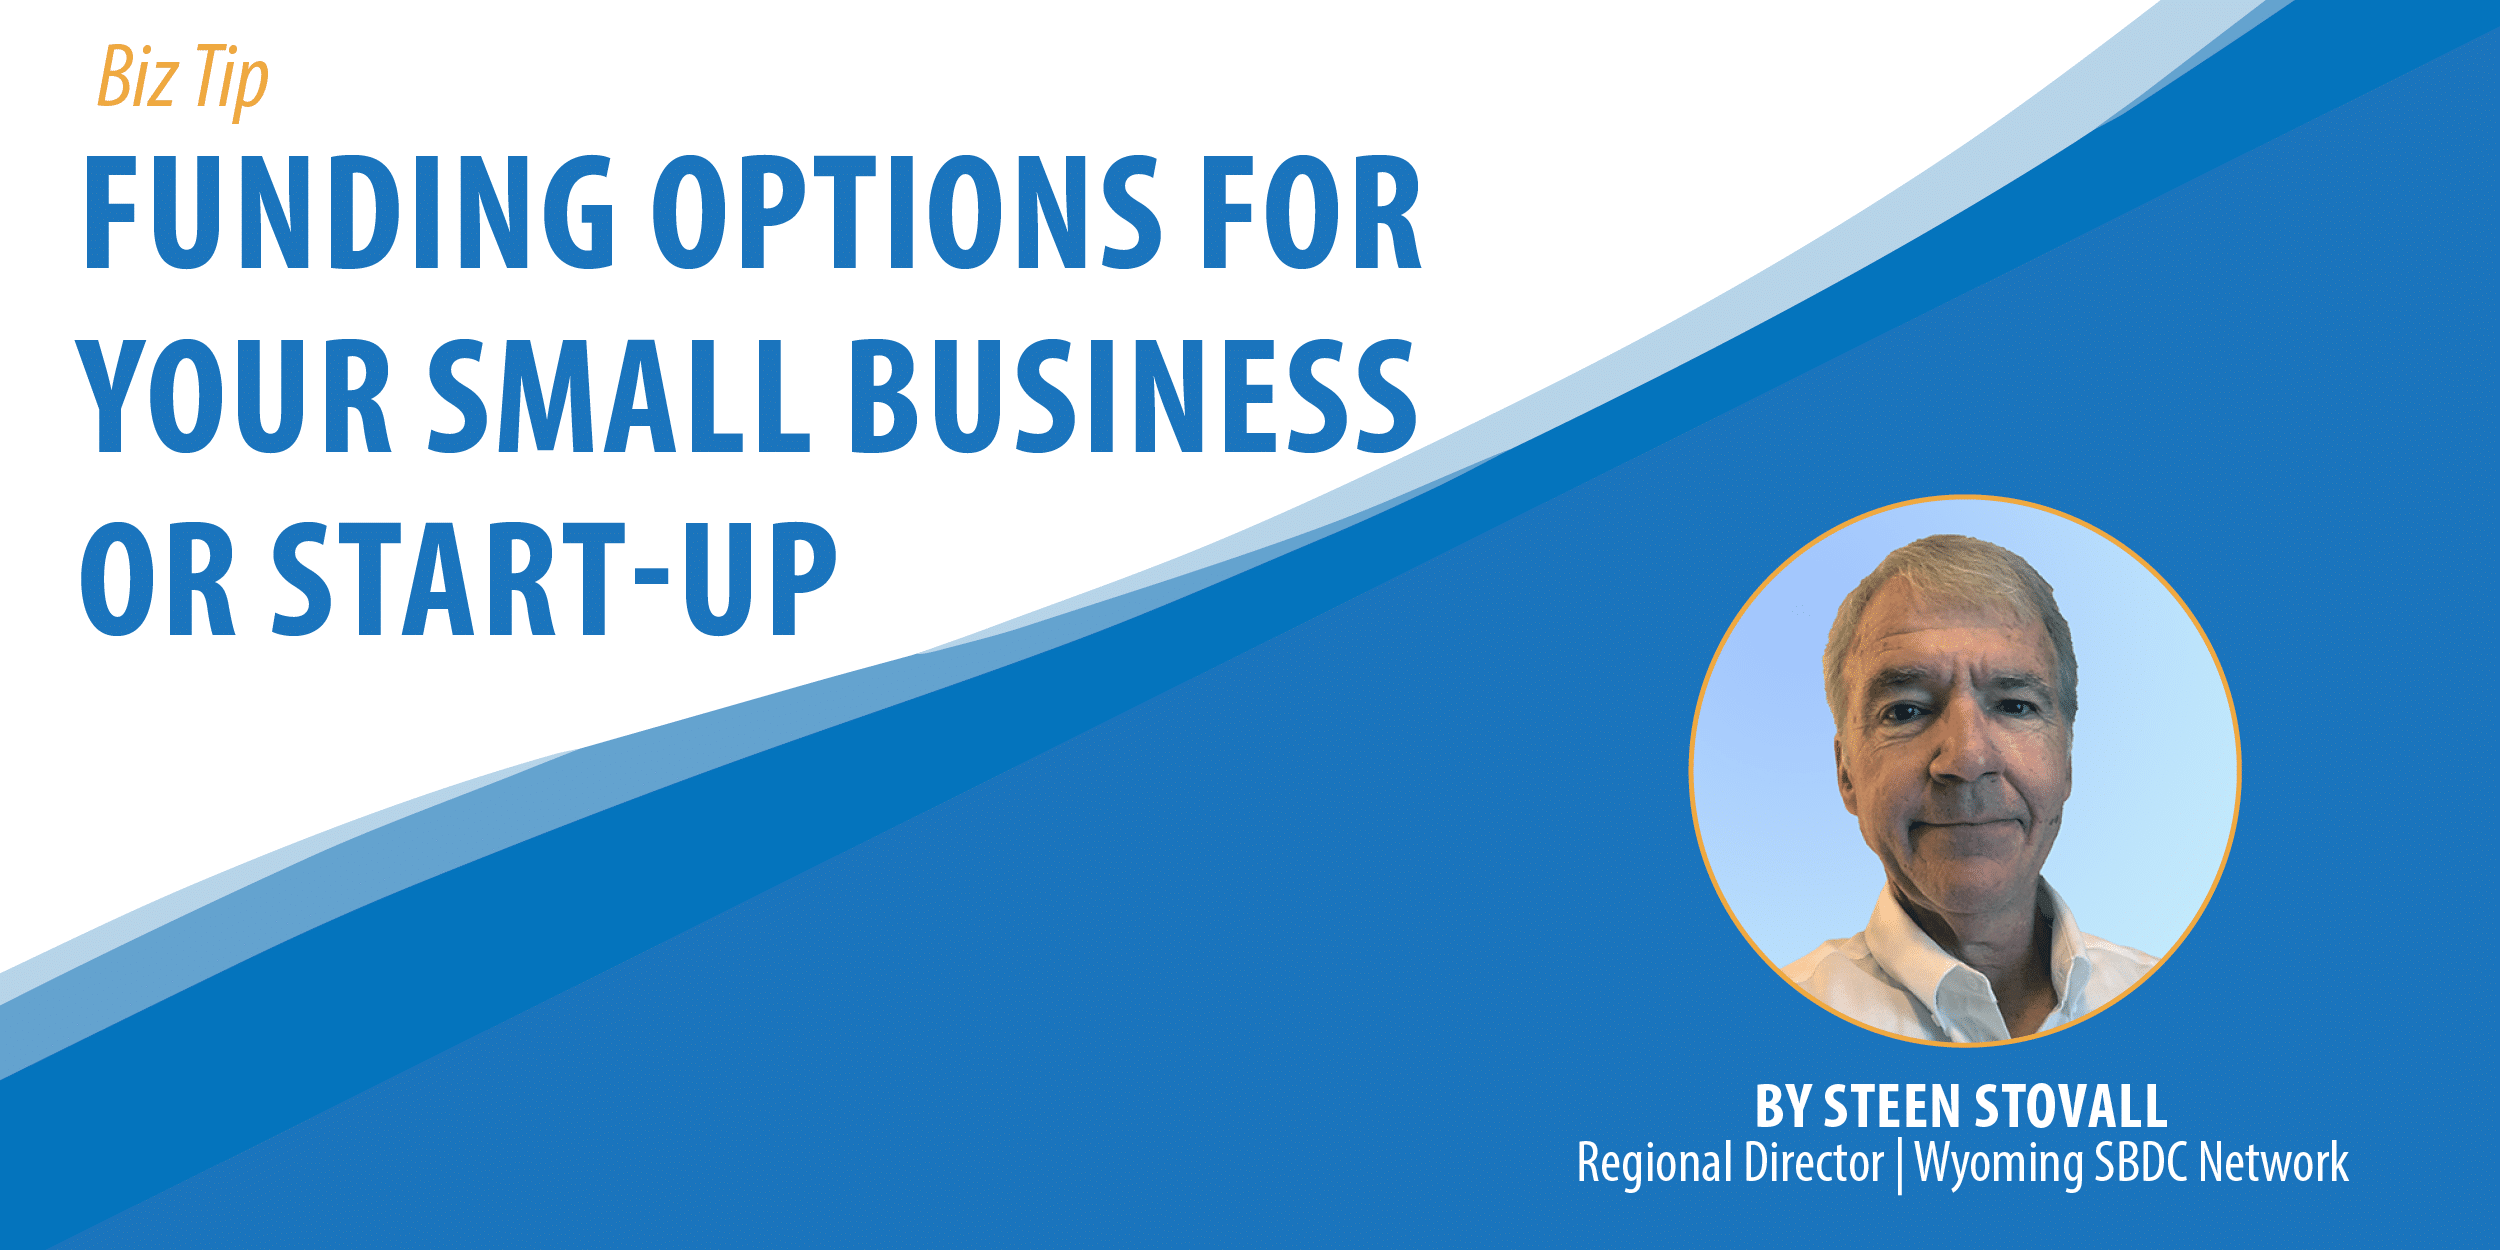 Funding Options For Your Small Business or Start-Up